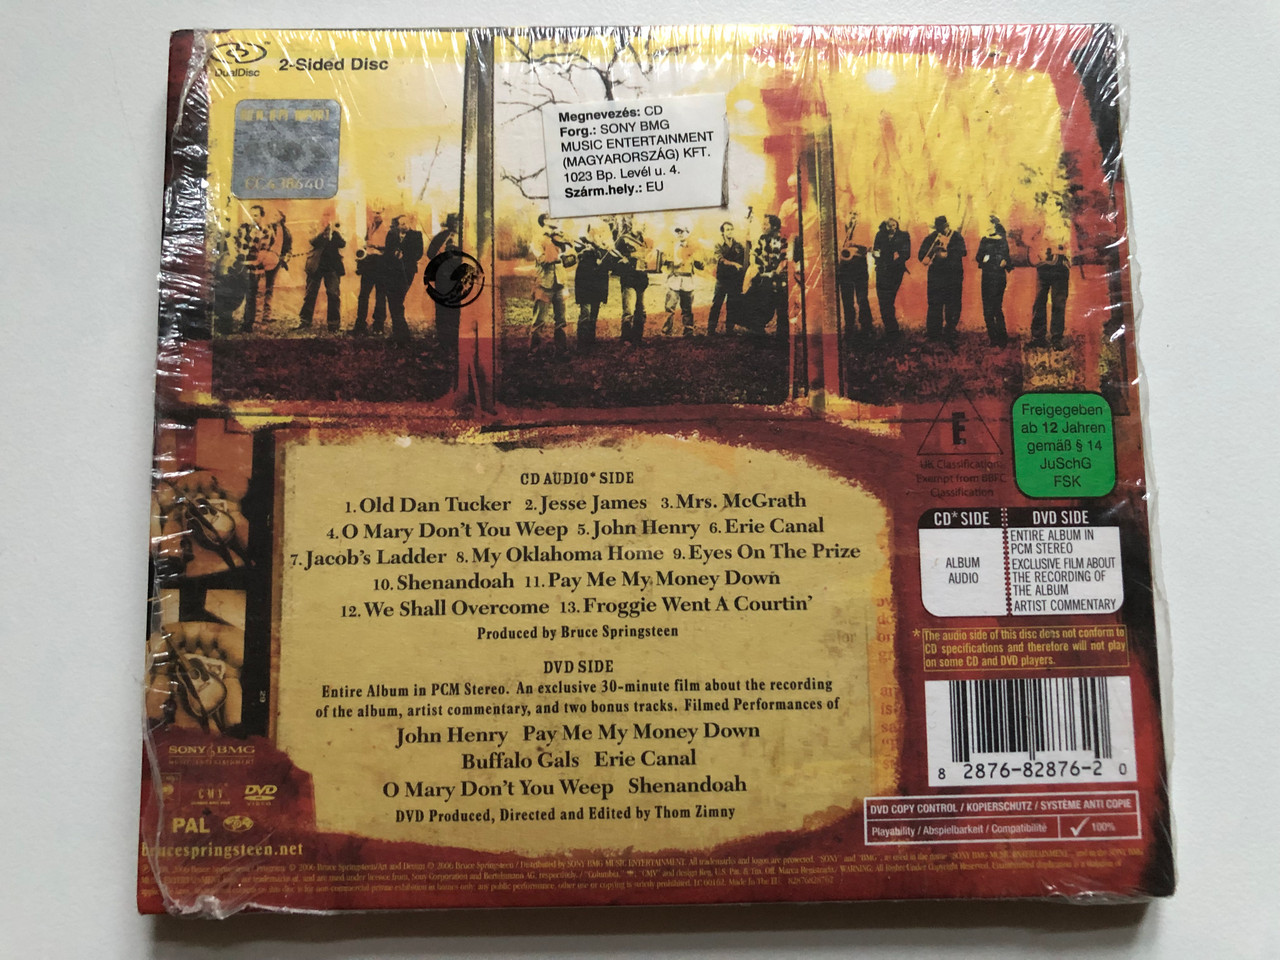 https://cdn10.bigcommerce.com/s-62bdpkt7pb/products/0/images/249995/Bruce_Springsteen_We_Shall_Overcome_The_Seeger_Sessions_Dual_Disc_-_CD_Side_Features_13_traditional_songs_associated_with_the_legendary_Pete_Seeger_DVD_Side_Album_in_PCM_Stereo___66991.1661160936.1280.1280.JPG?c=2&_gl=1*w7fw9u*_ga*MjA2NTIxMjE2MC4xNTkwNTEyNTMy*_ga_WS2VZYPC6G*MTY2MTE1MDA1NS41MzMuMS4xNjYxMTYwODk0LjYwLjAuMA..